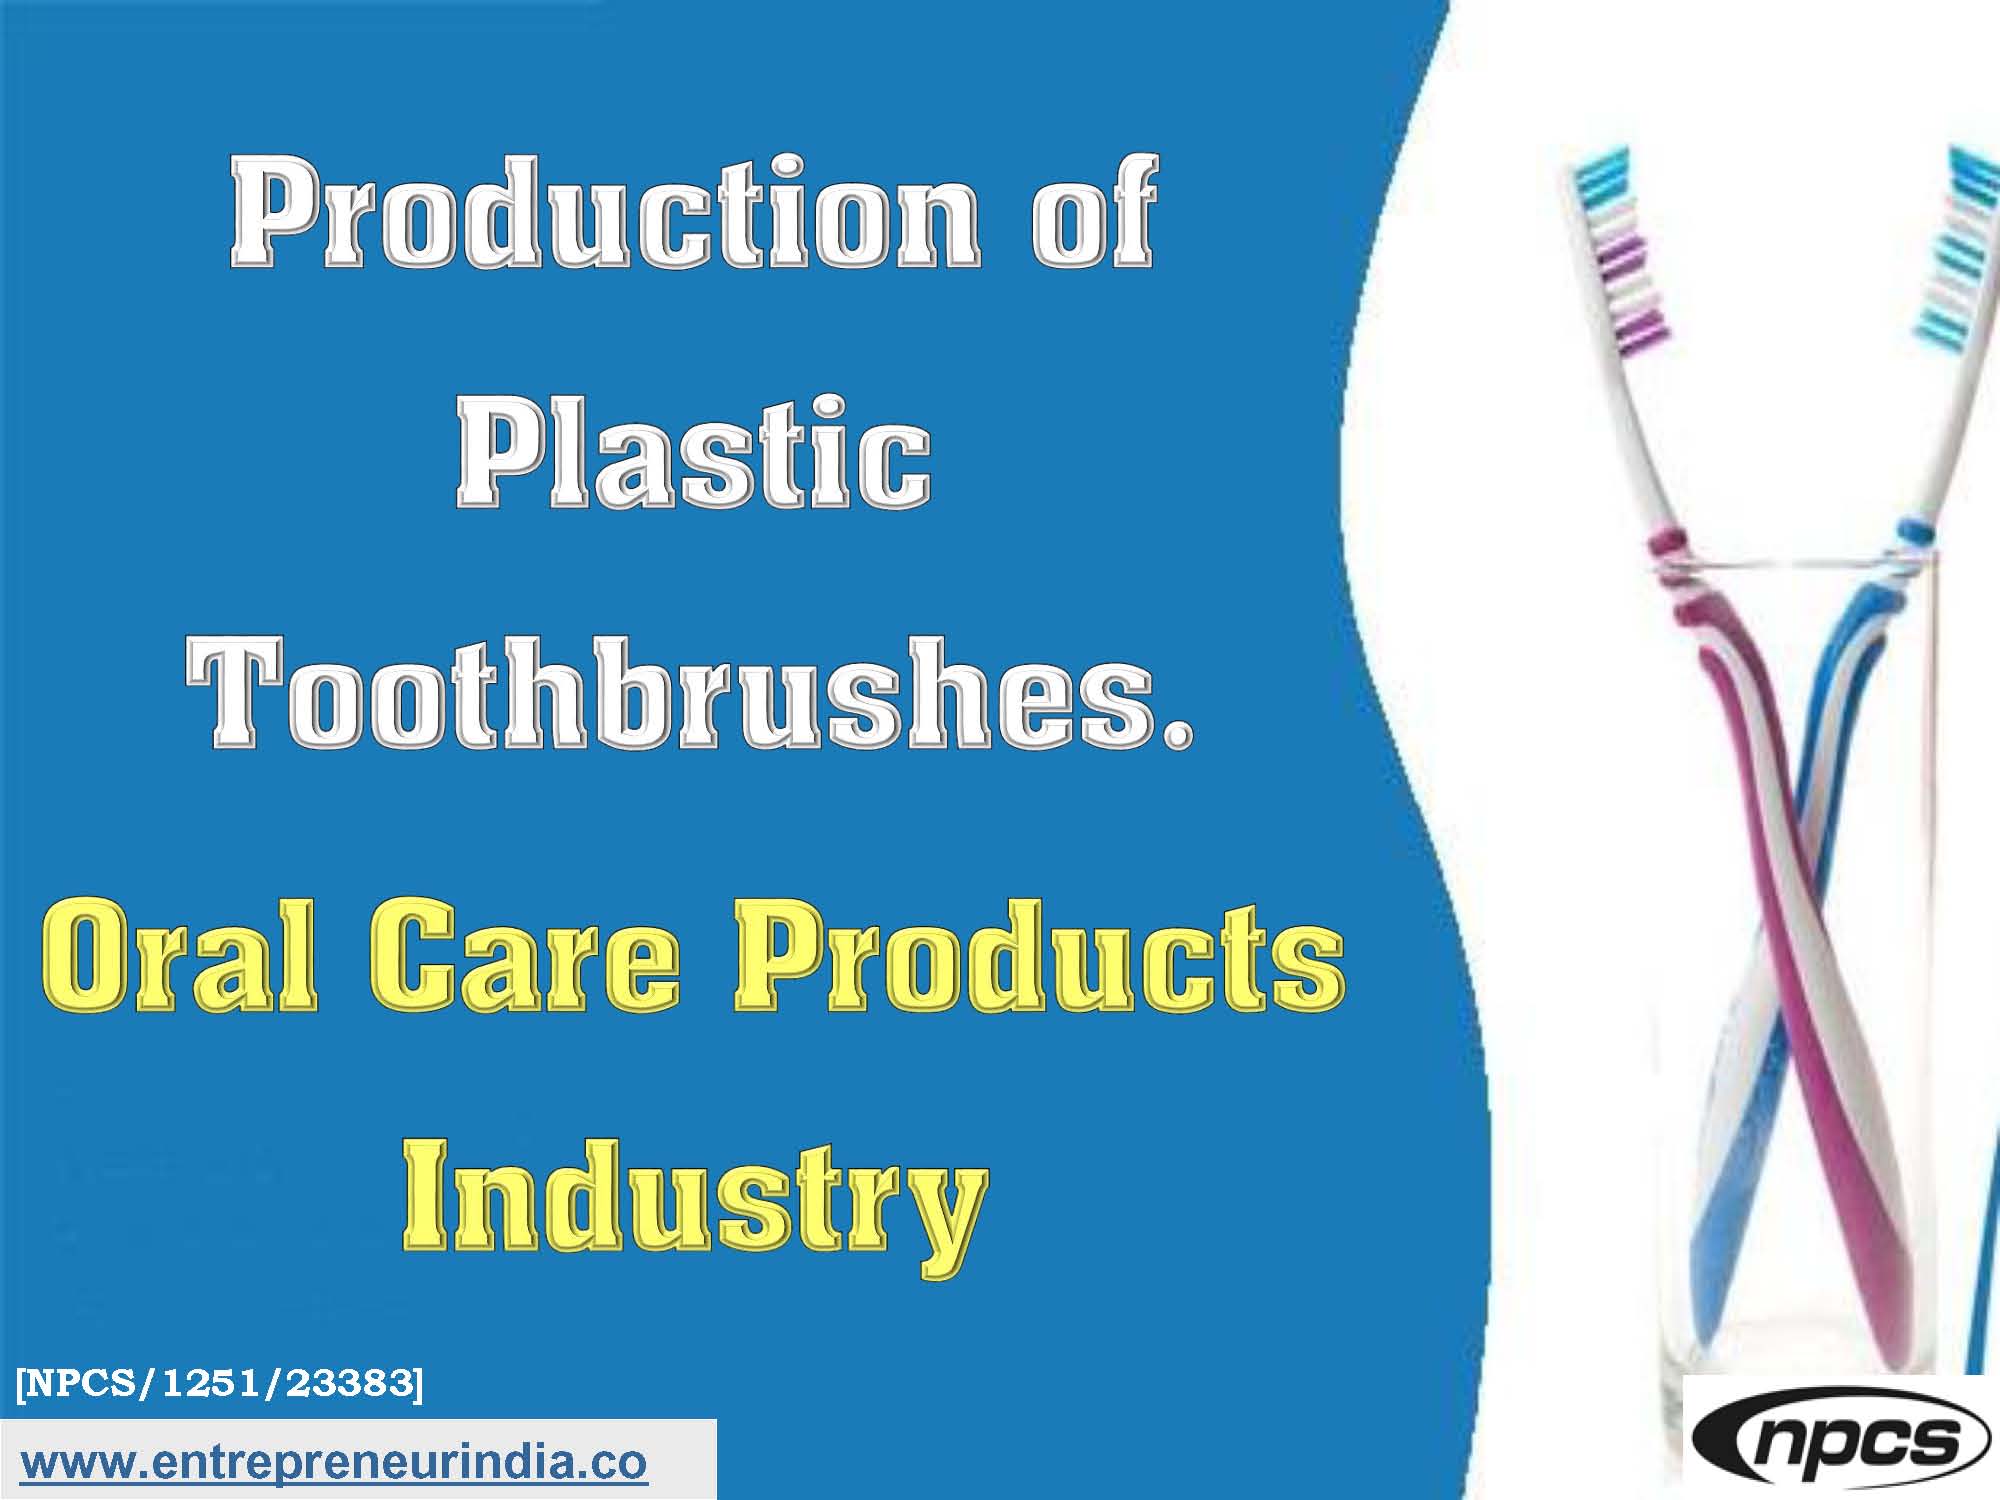 Production of Plastic Toothbrushes